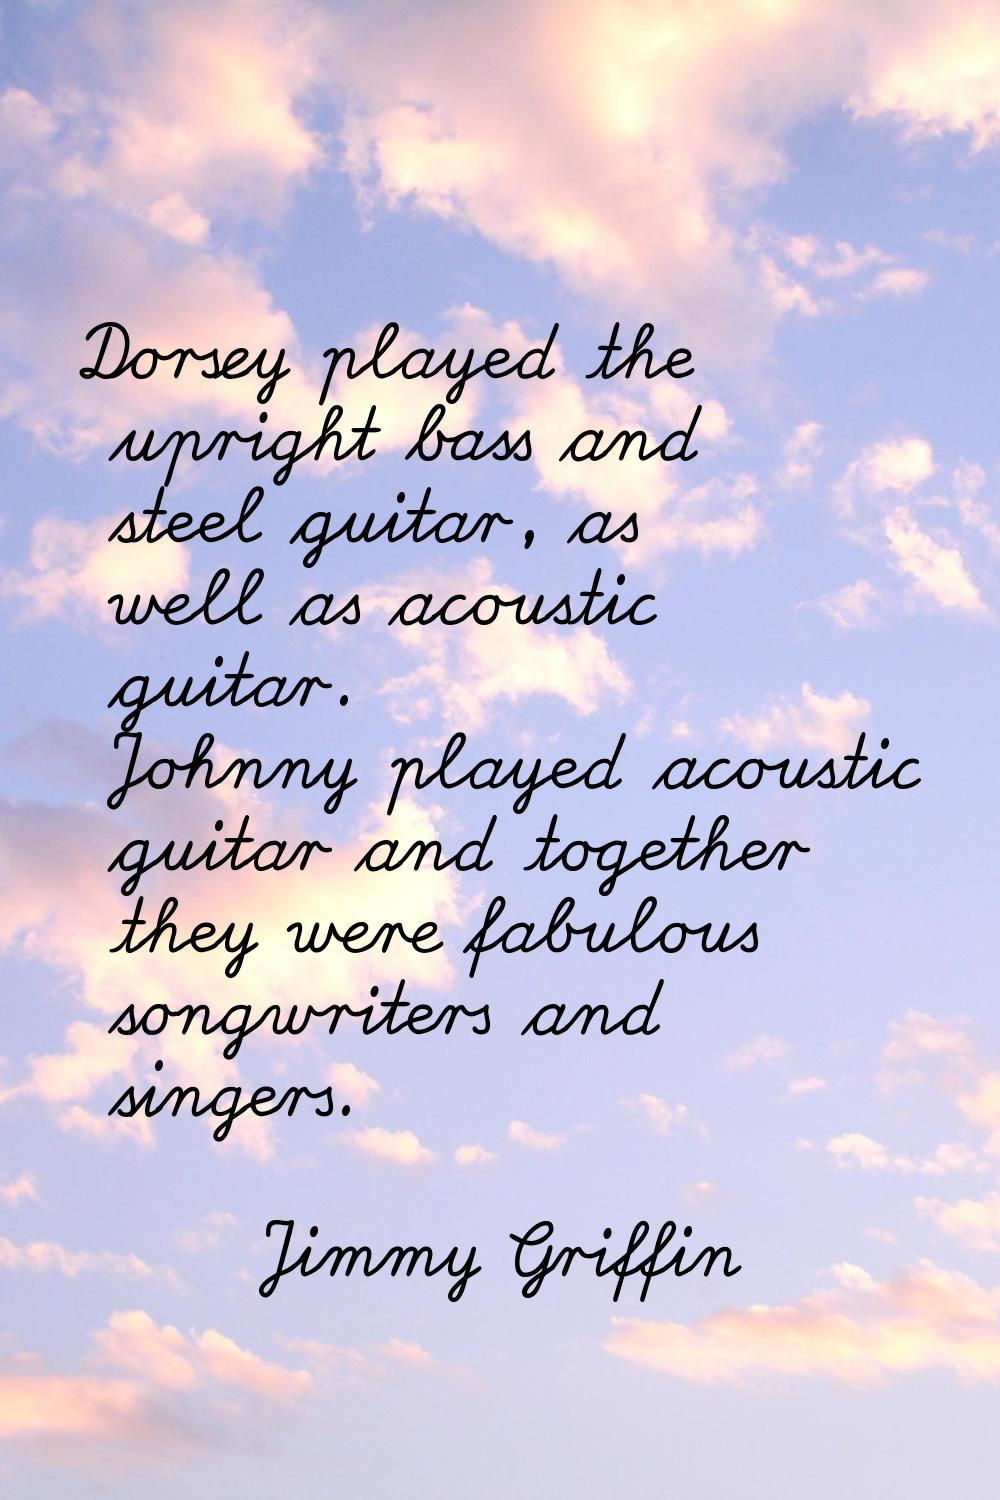 Dorsey played the upright bass and steel guitar, as well as acoustic guitar. Johnny played acoustic